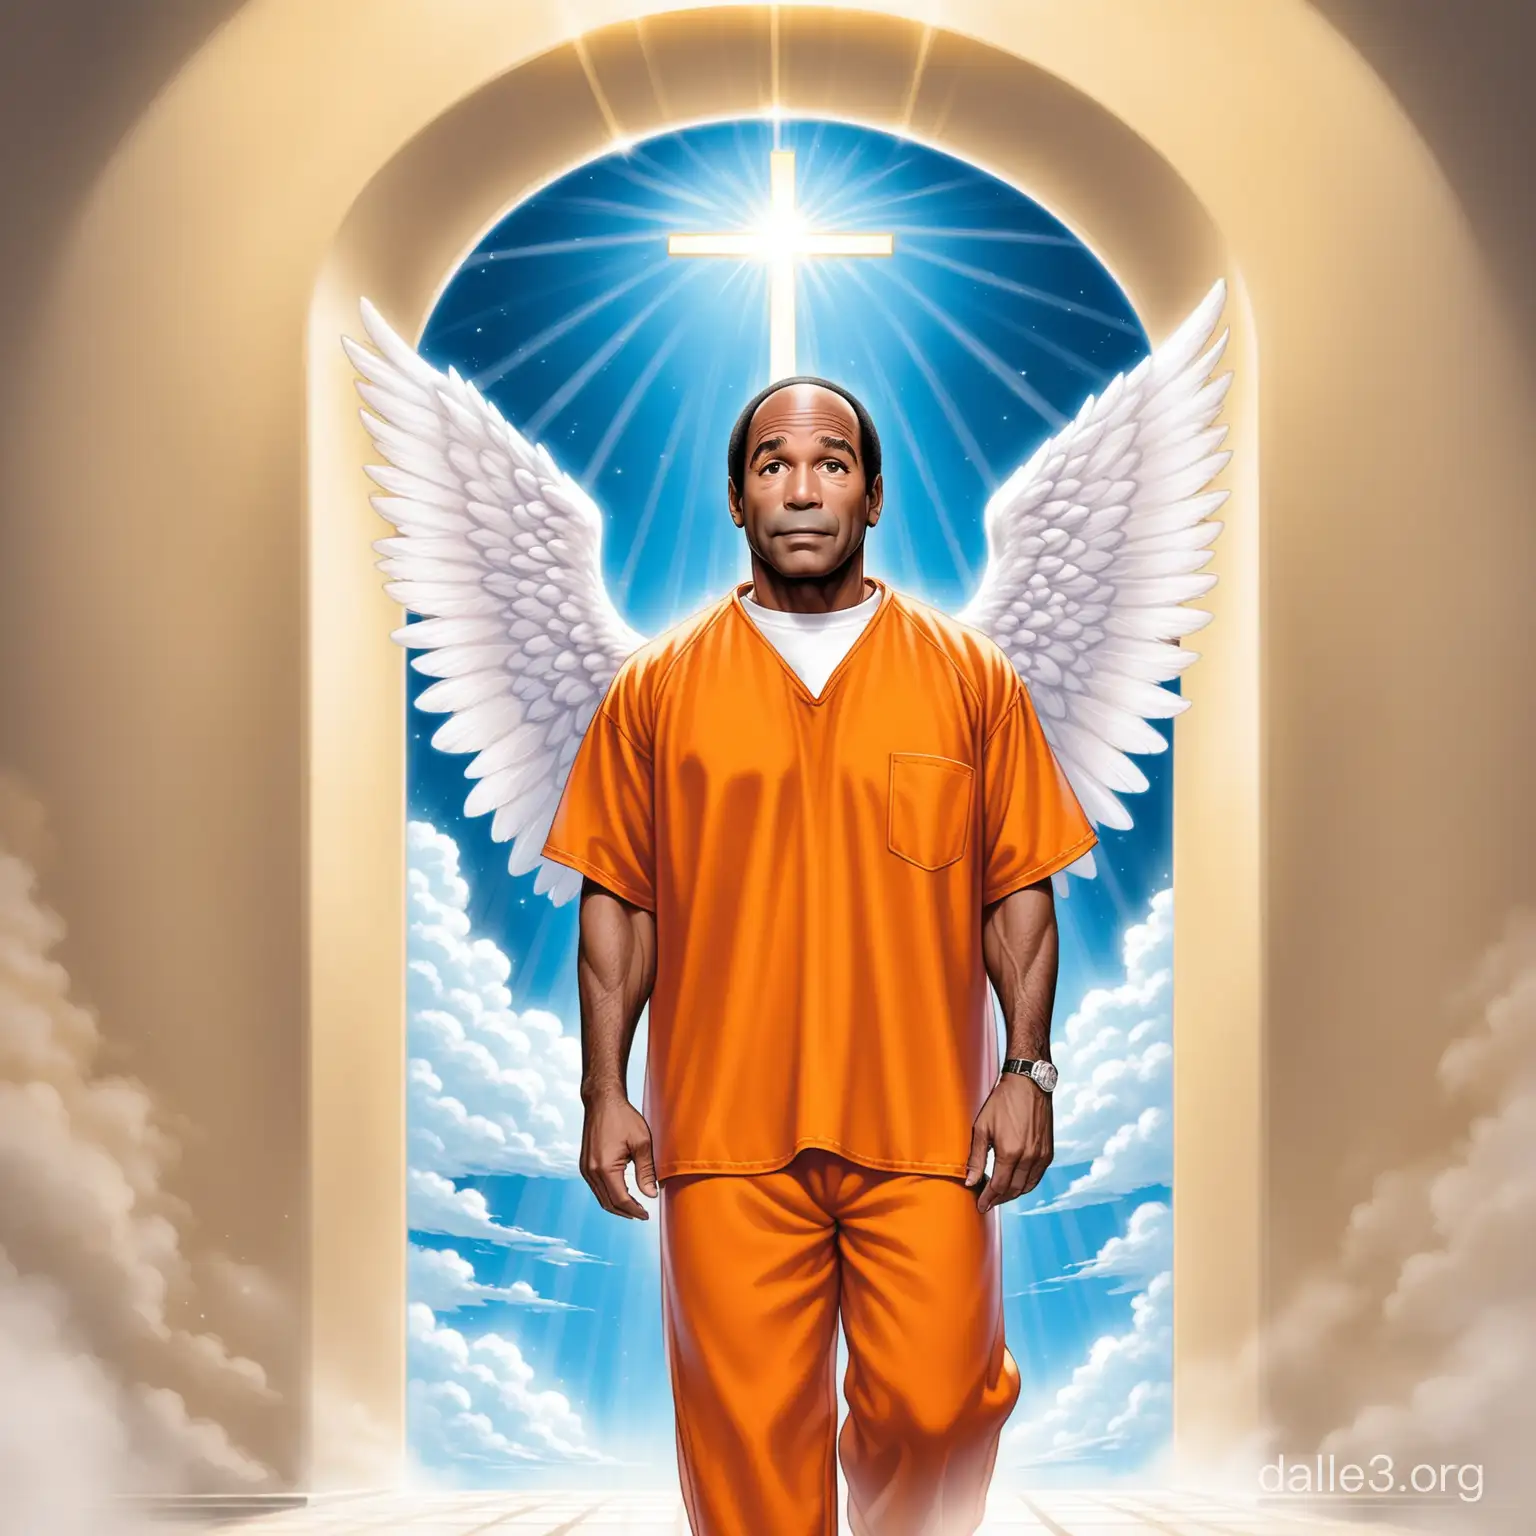 OJ Simpson dressed in prison clothes with angel wings at the pearly gates of heaven.